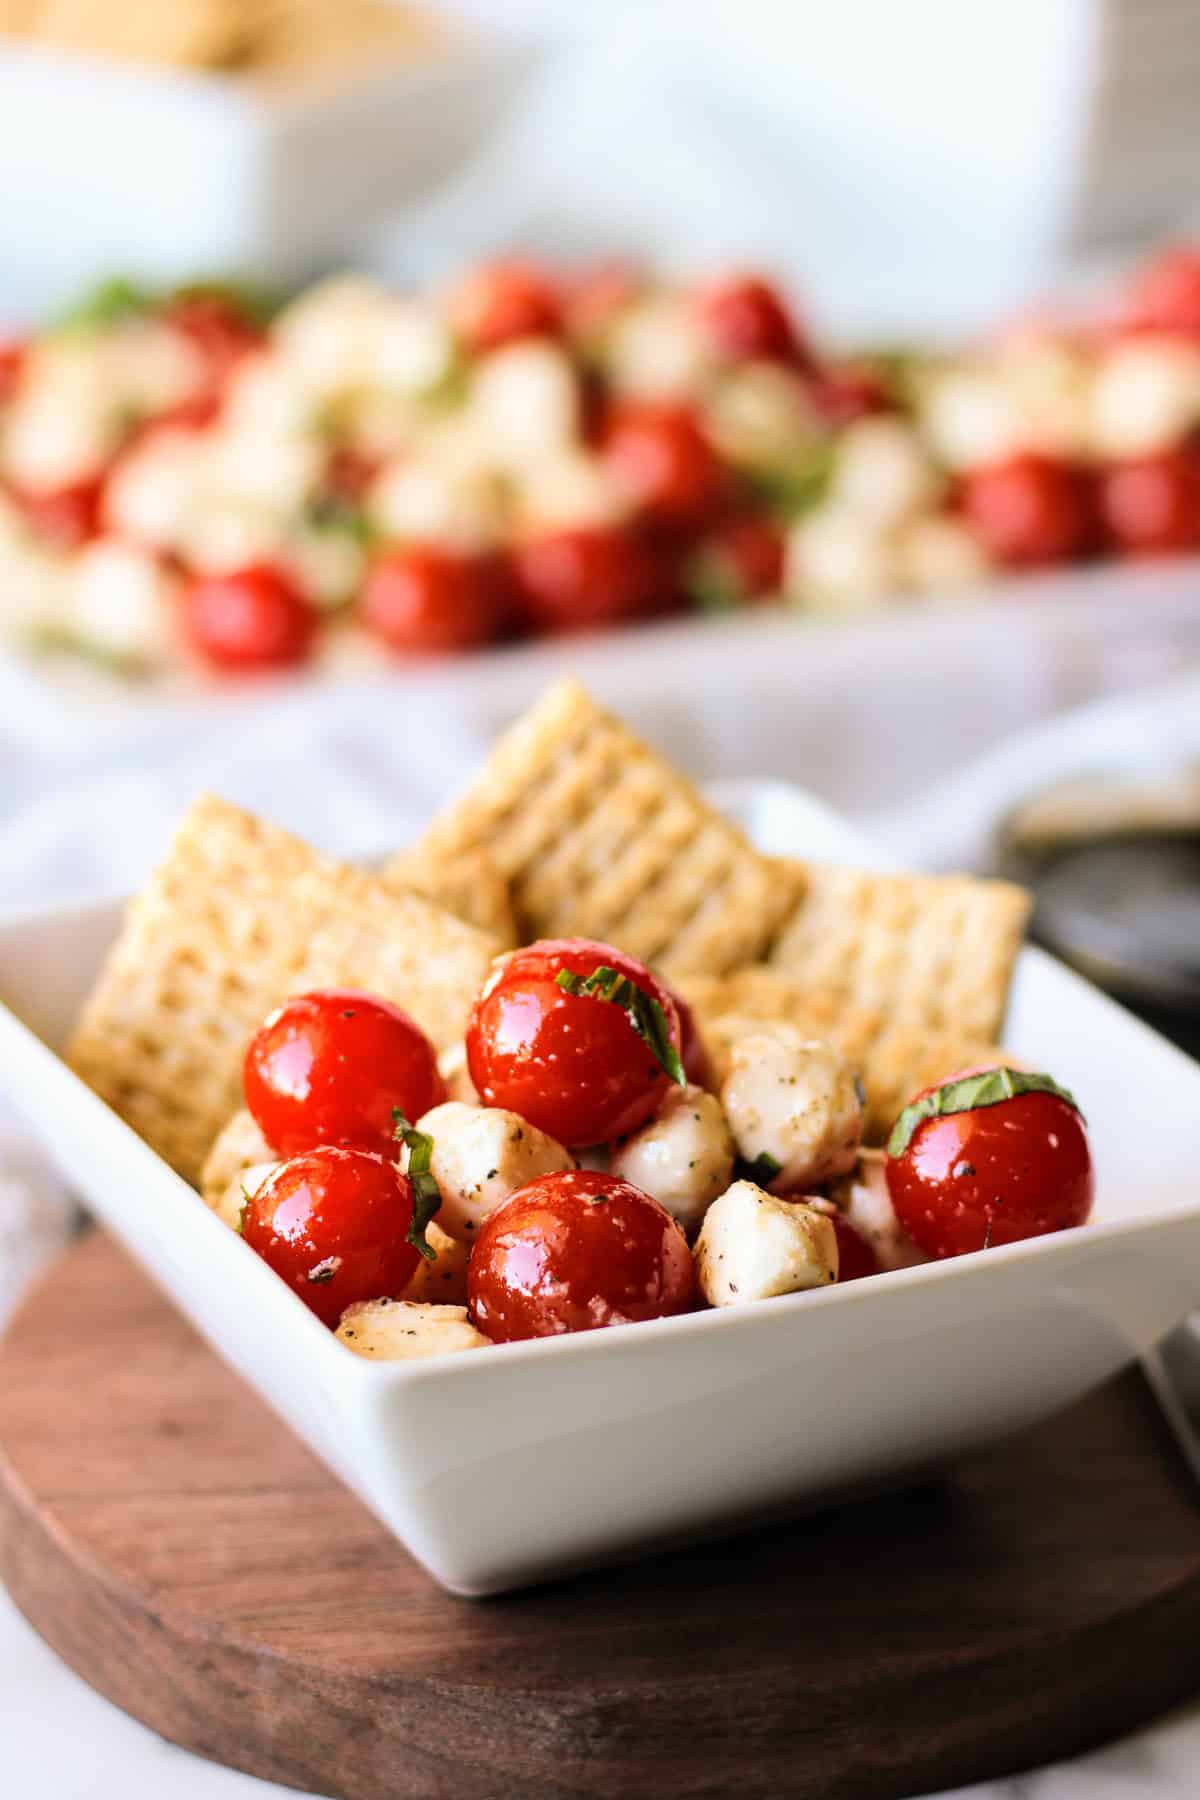 Bowl of tomato salad with crackers.